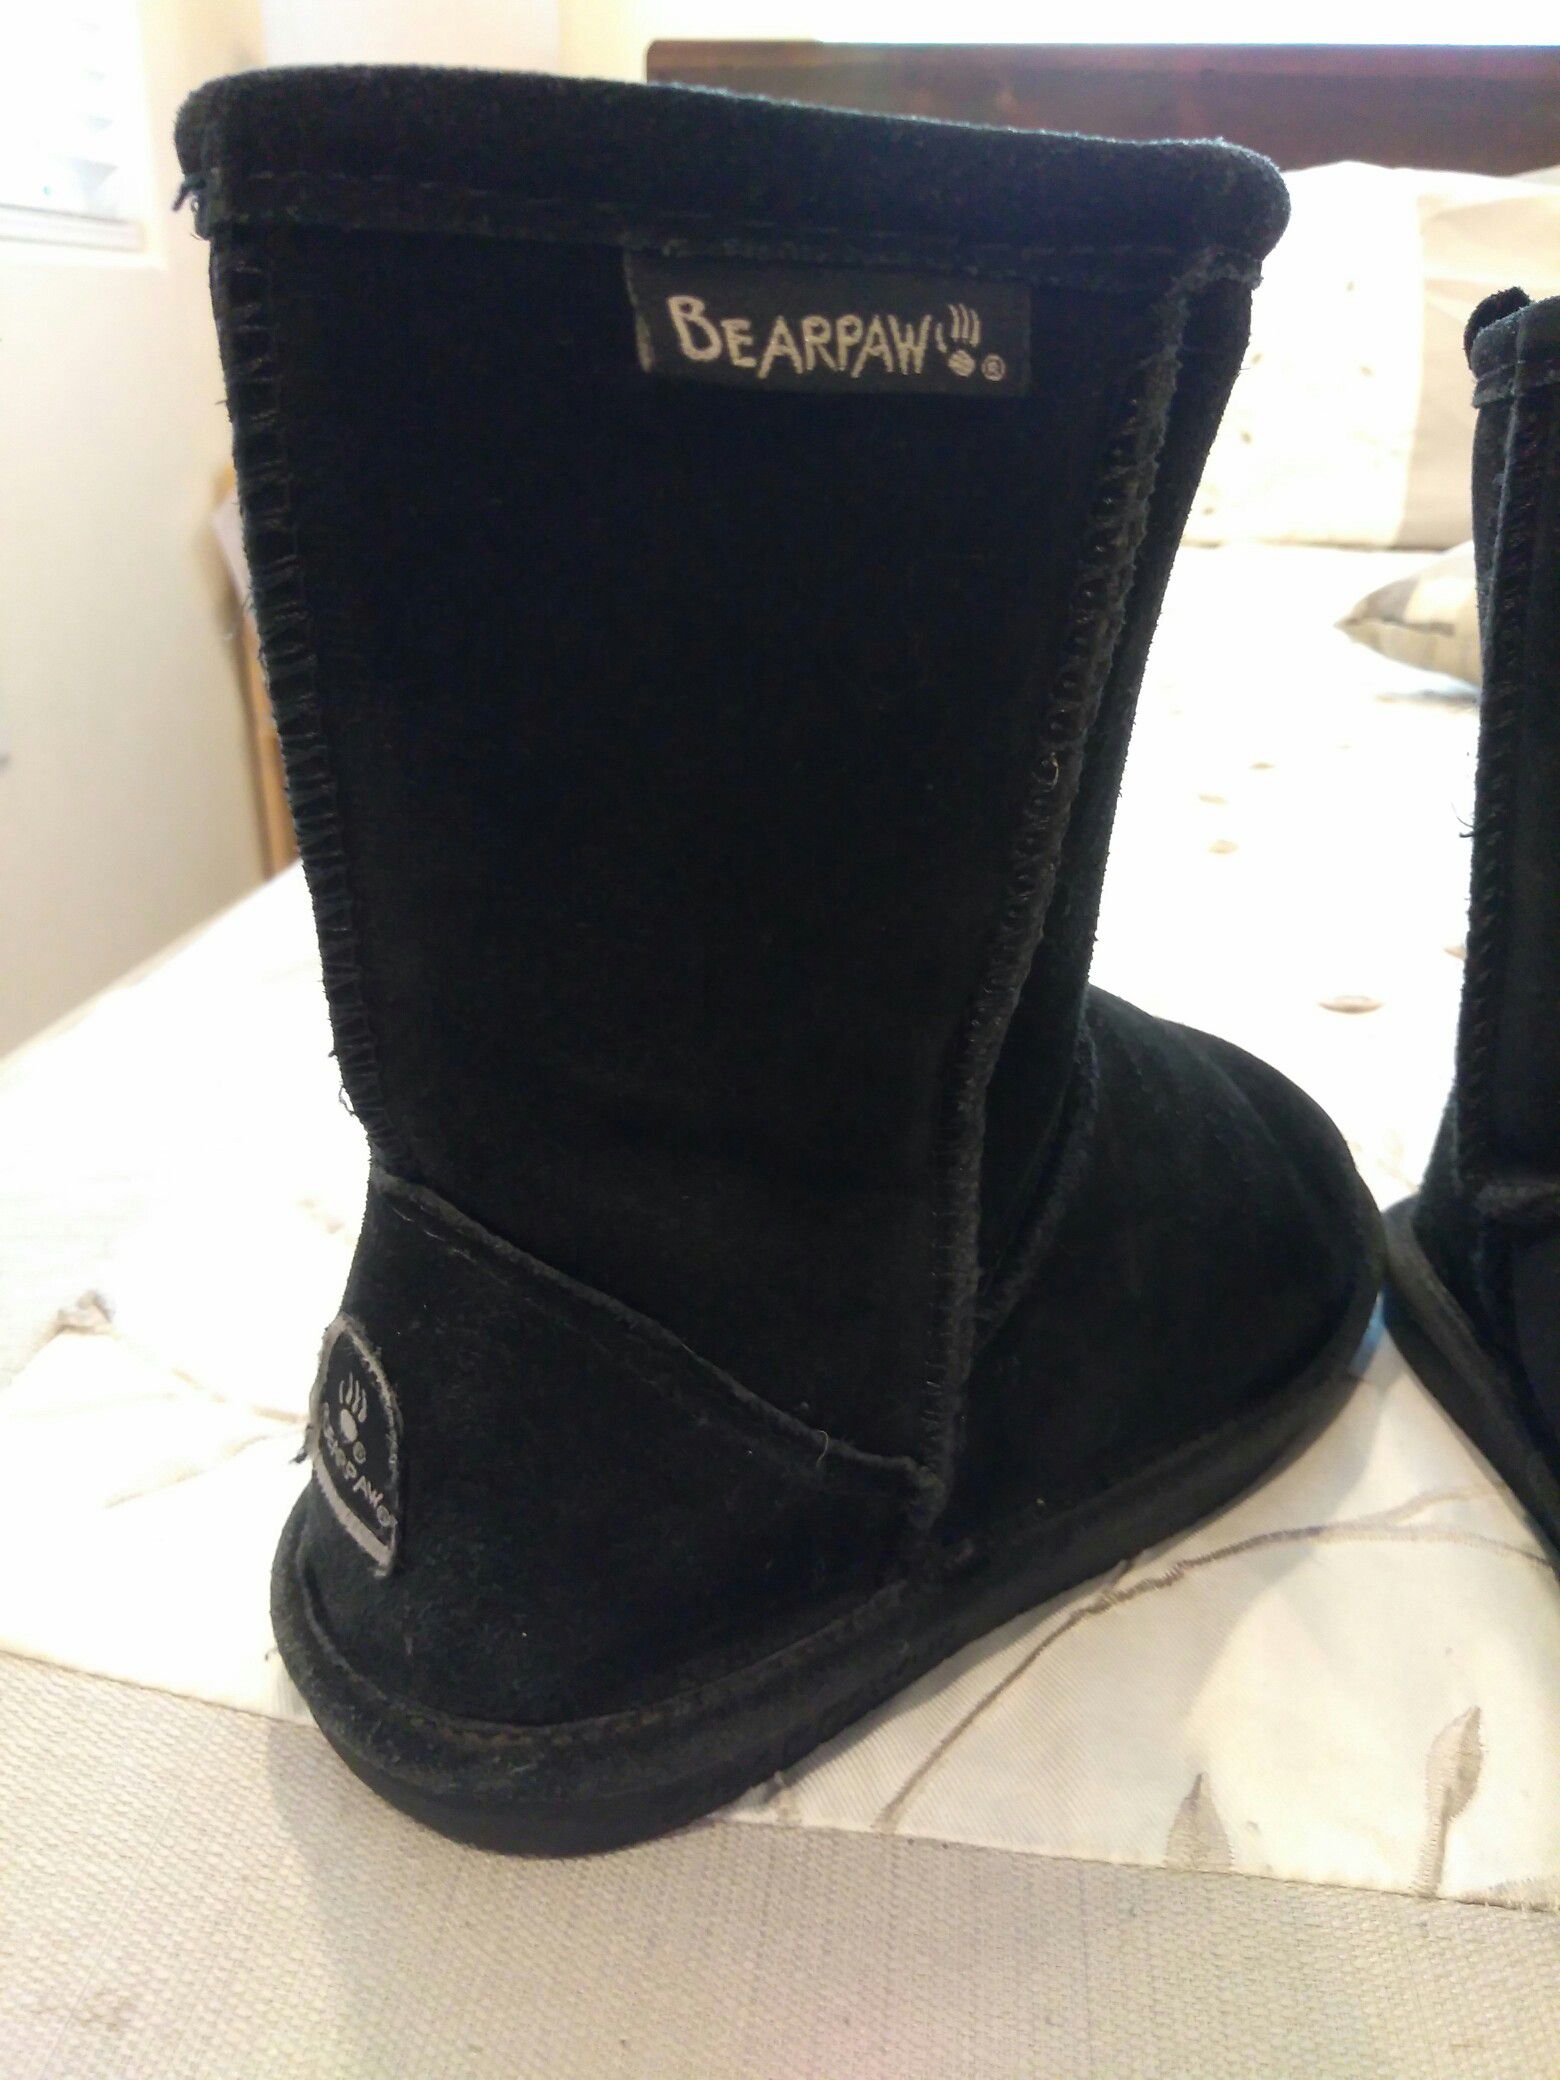 Bear Paw boots for girls size 1